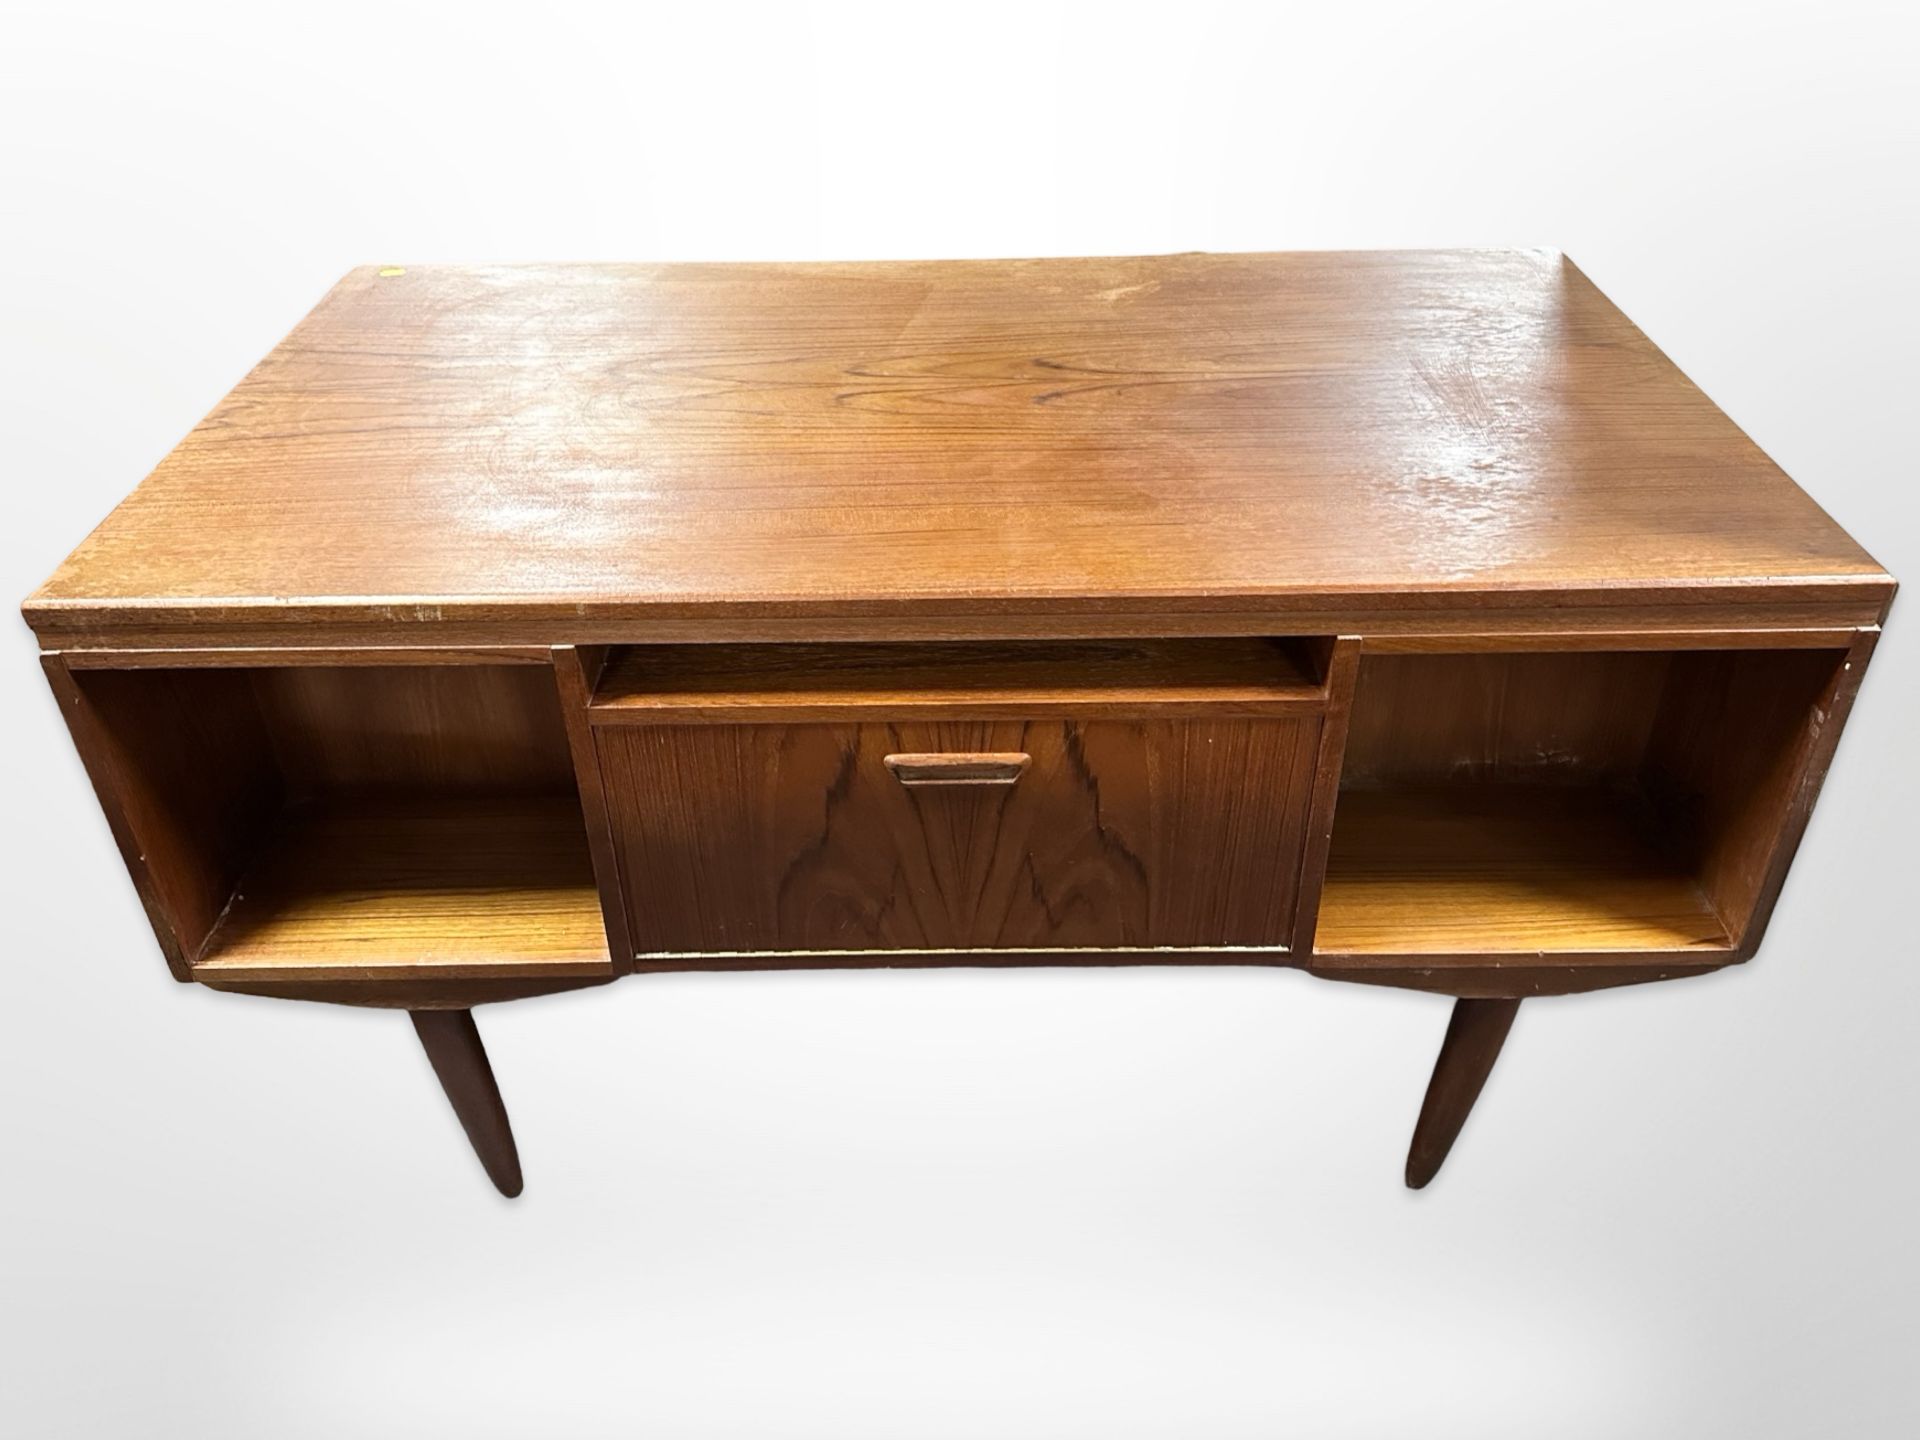 A 20th century Danish teak double sided twin-pedestal writing desk on tapered legs, - Image 2 of 2